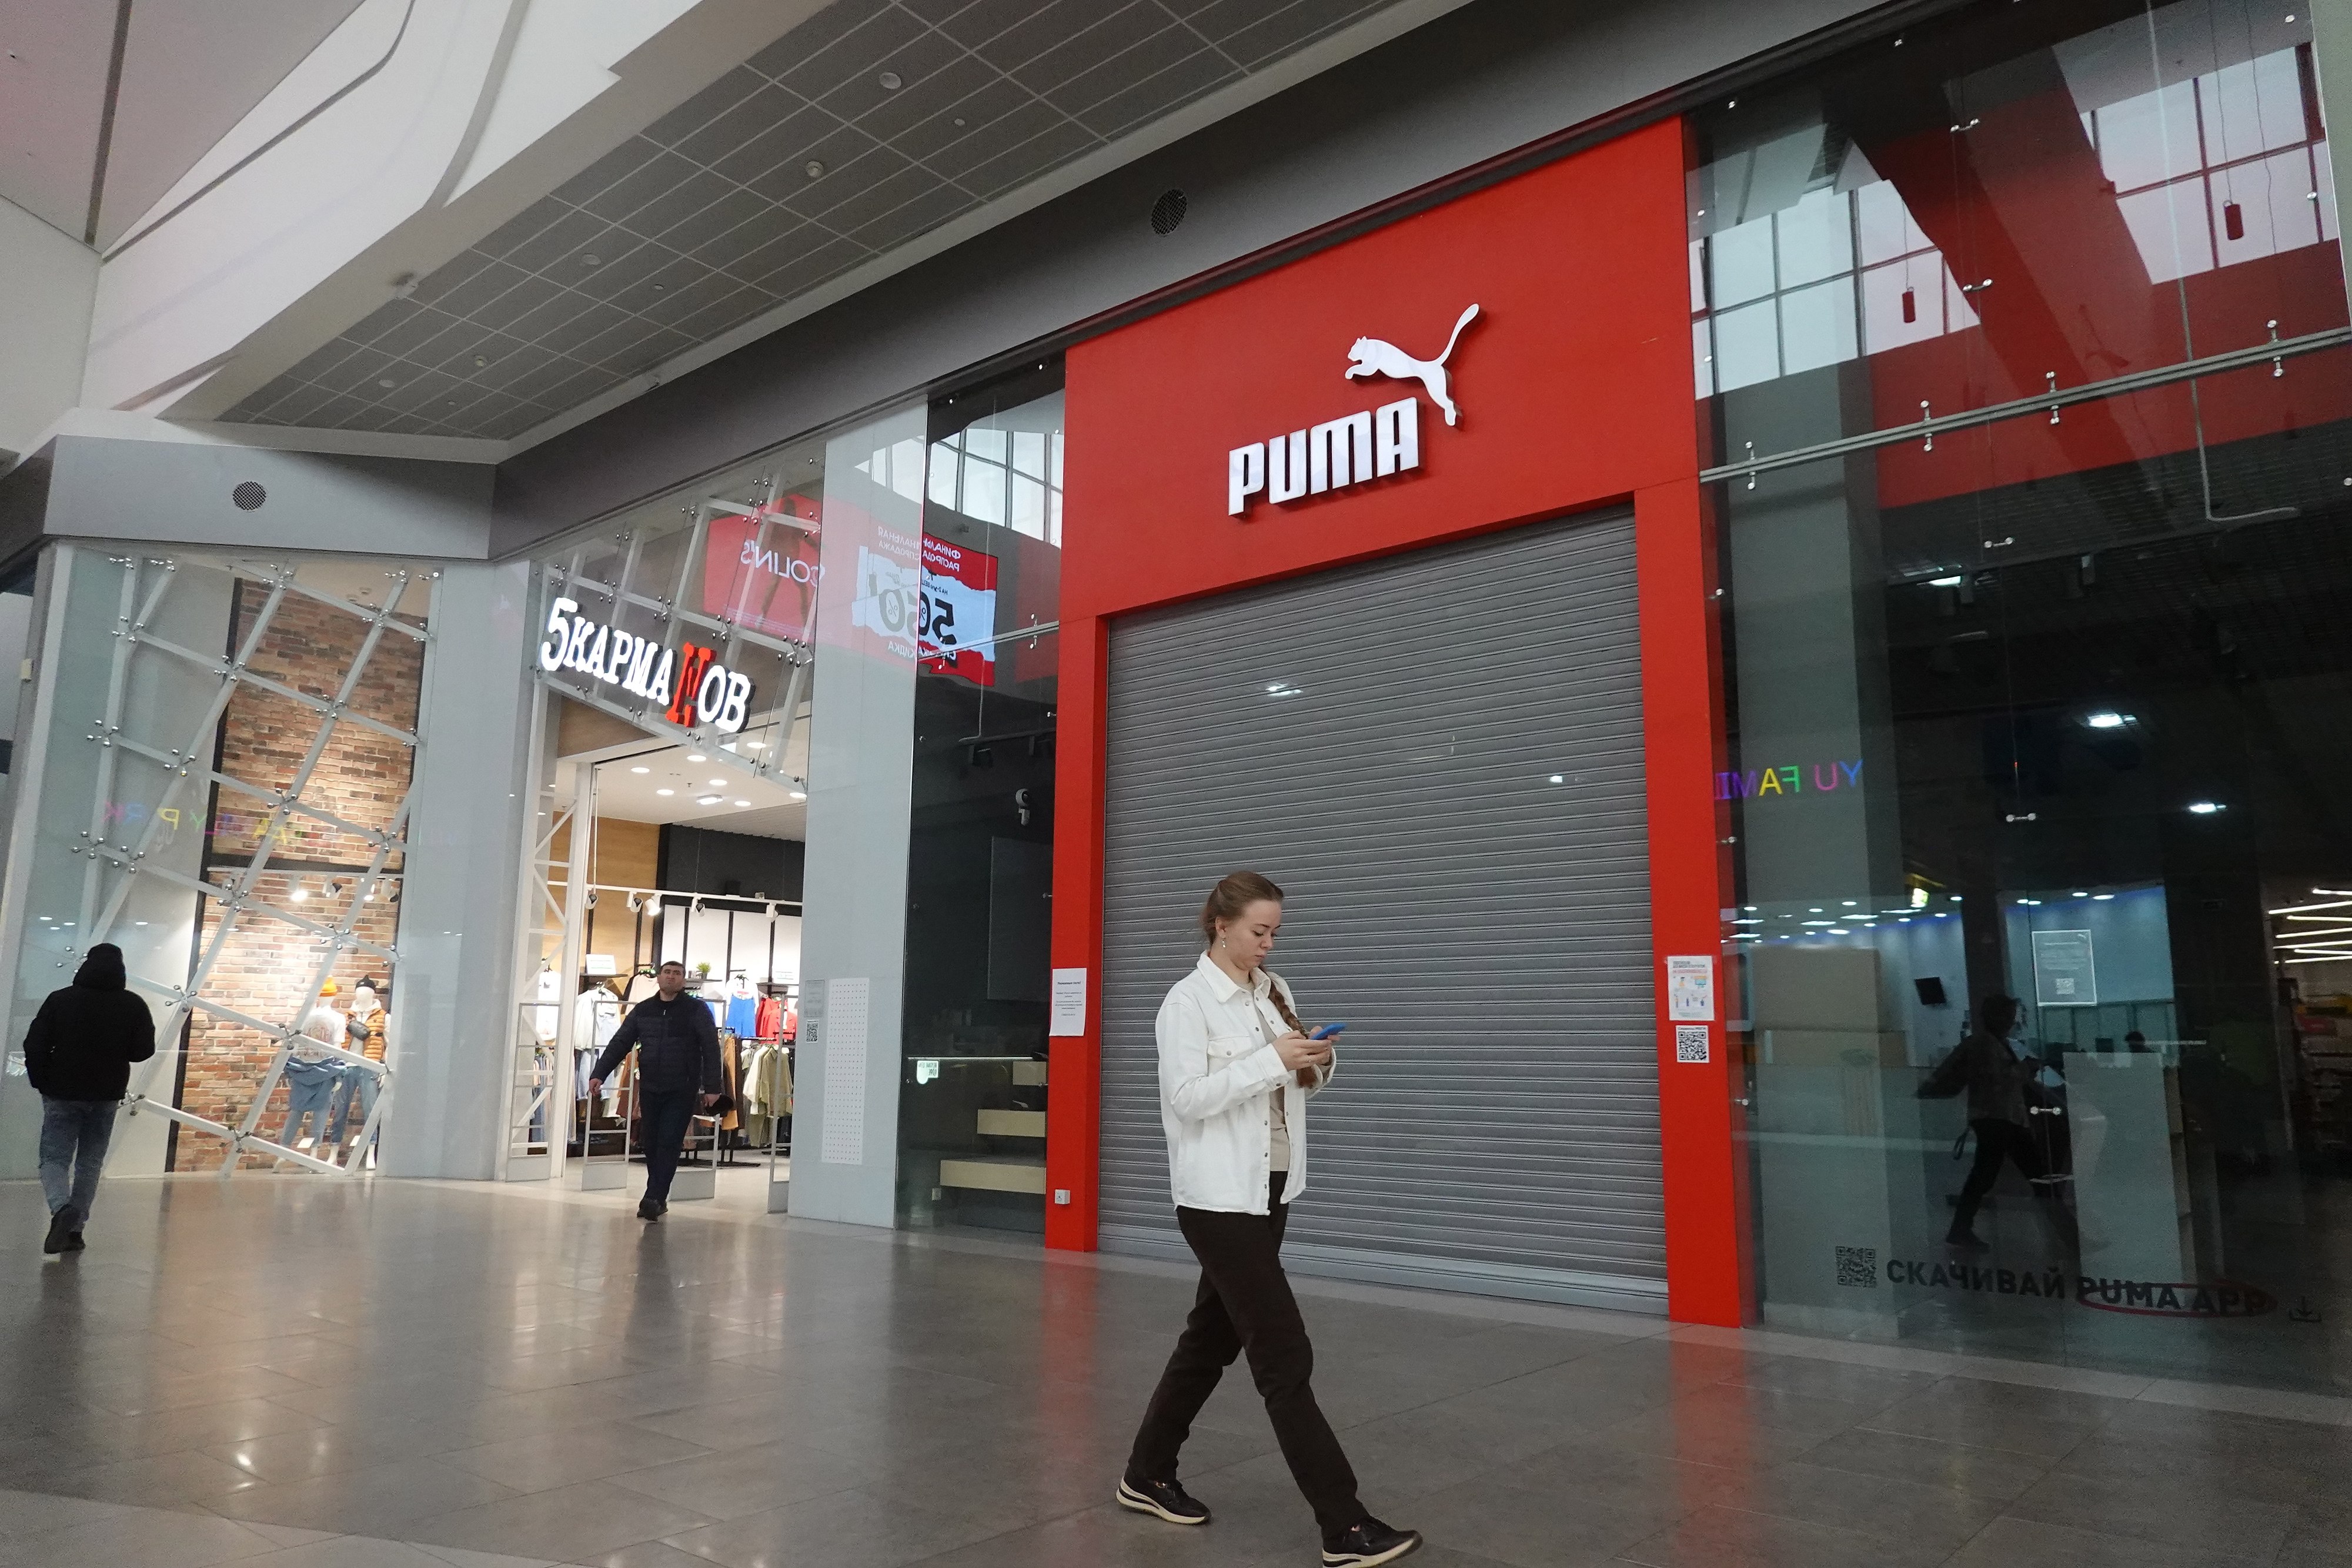 Customers walk in front of a closed Puma store at a shopping centre in Moscow on February 16. As part of the economic sanctions imposed by the West on Russia, Puma and a number of other international brands announced the suspension, limitation or closing of their operations in Russia. Photo: EPA-EFE